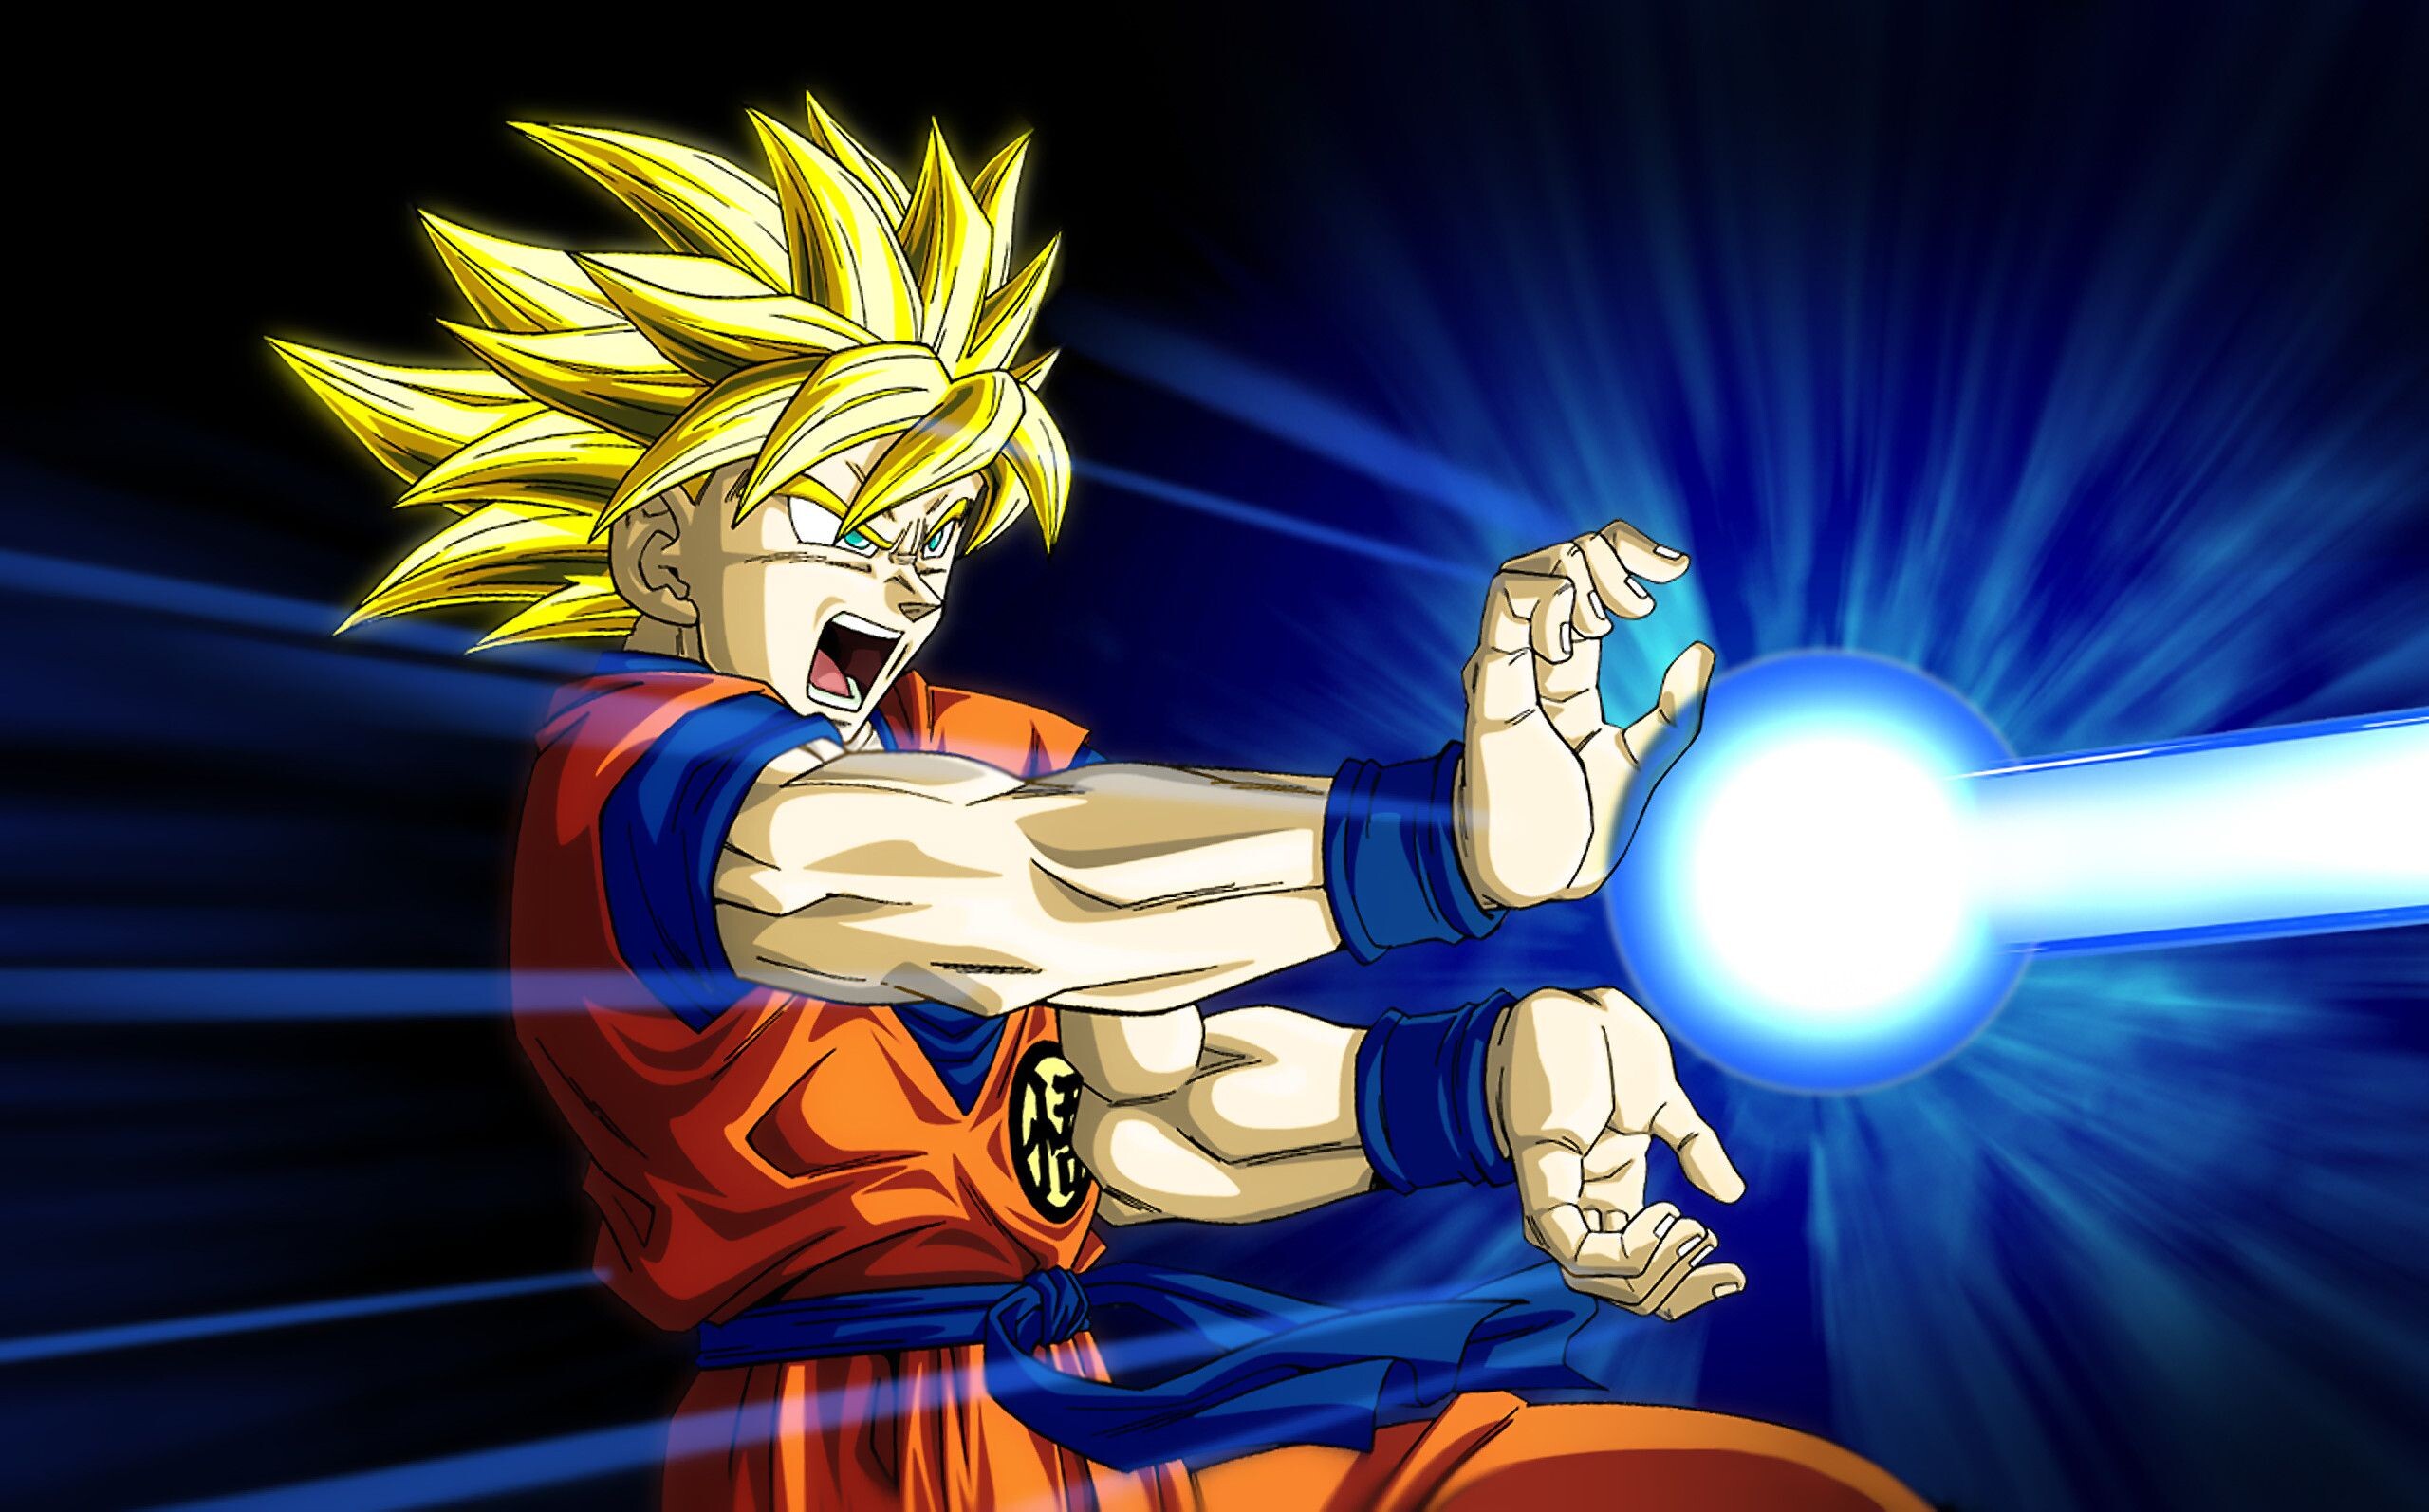 Goku Kamehameha: The most widely used finishing attack in the Dragon Ball series, Goku's signature technique. 2560x1600 HD Background.